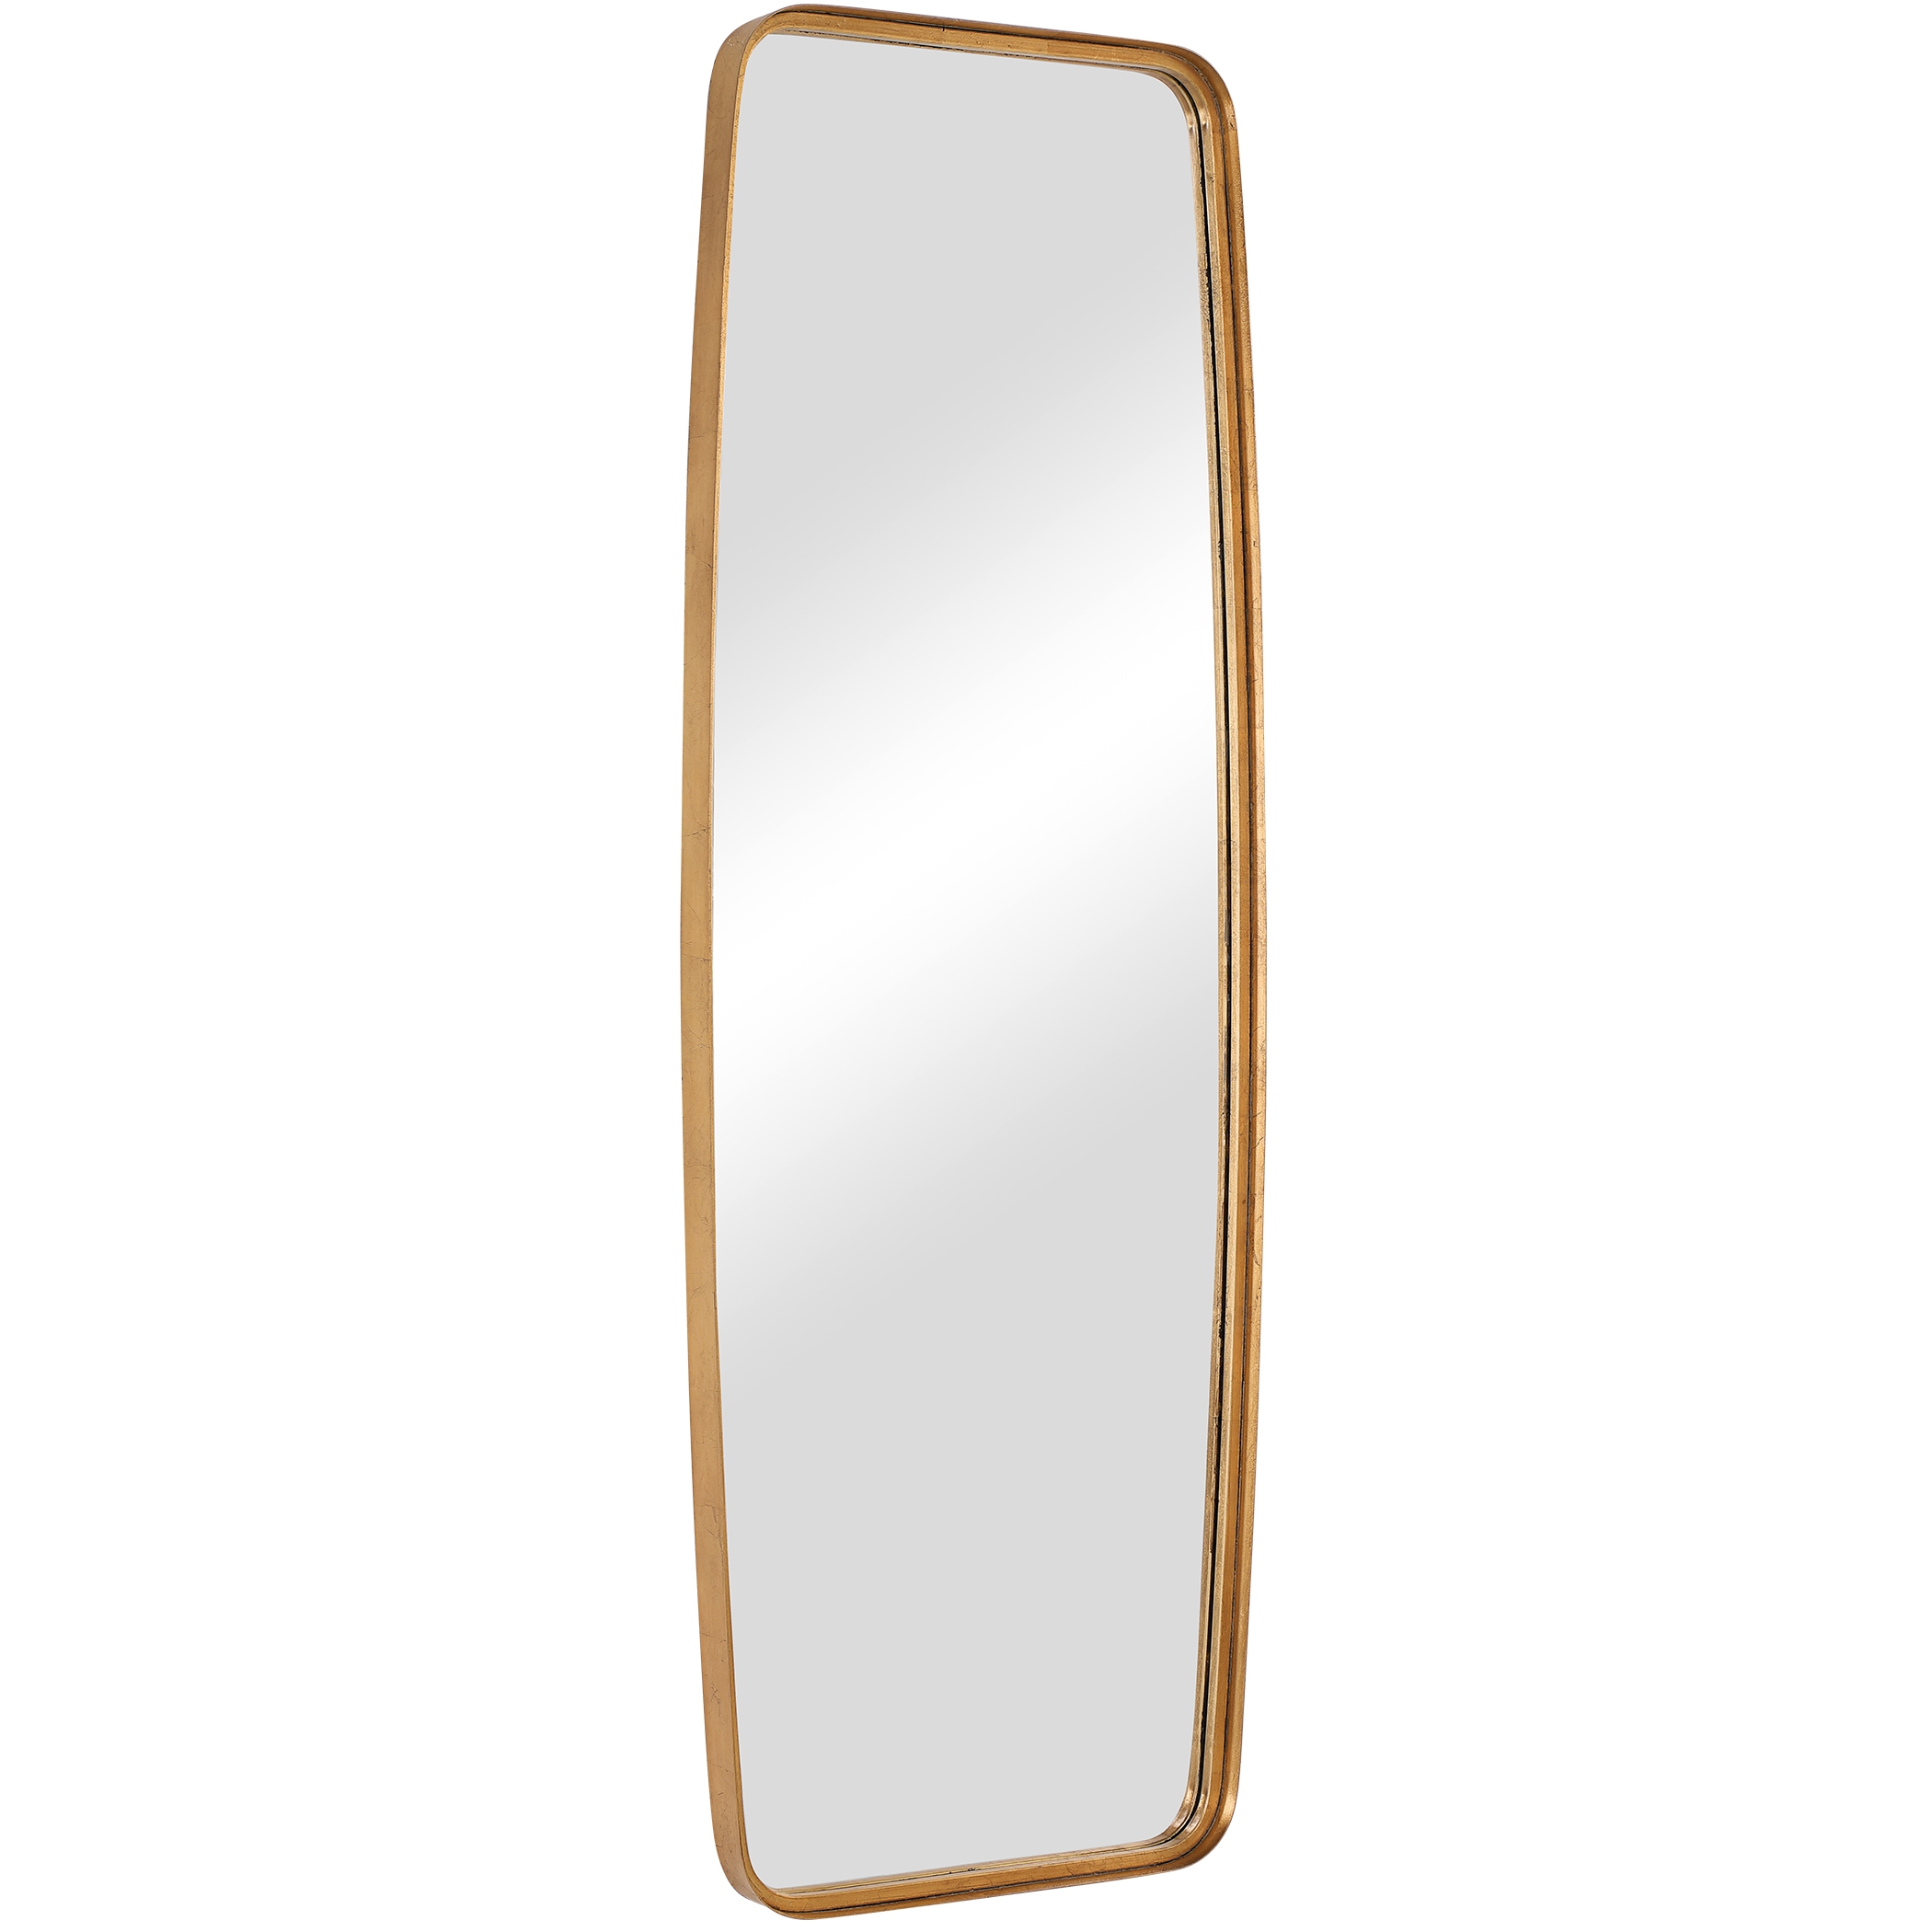 Rounded Corners Mirror - Image 2